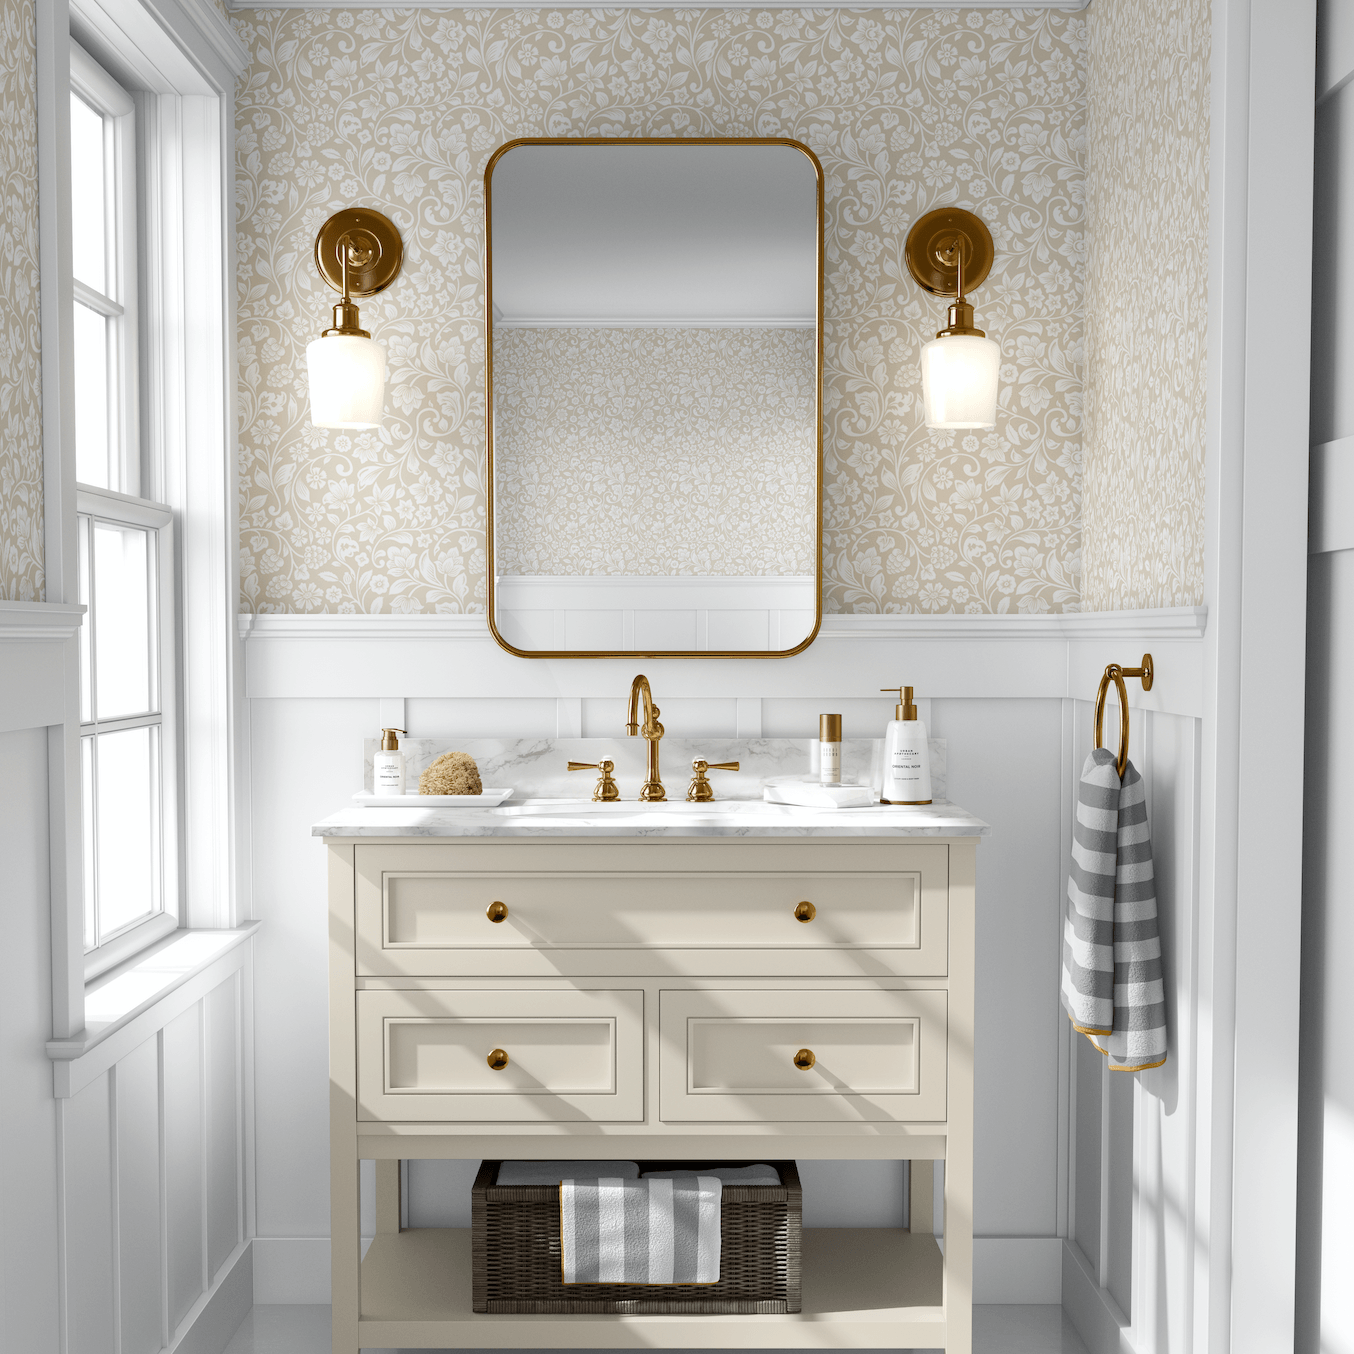 baroque removable peel and stick wallpaper for walls in bathroom with mirror and cream vanity